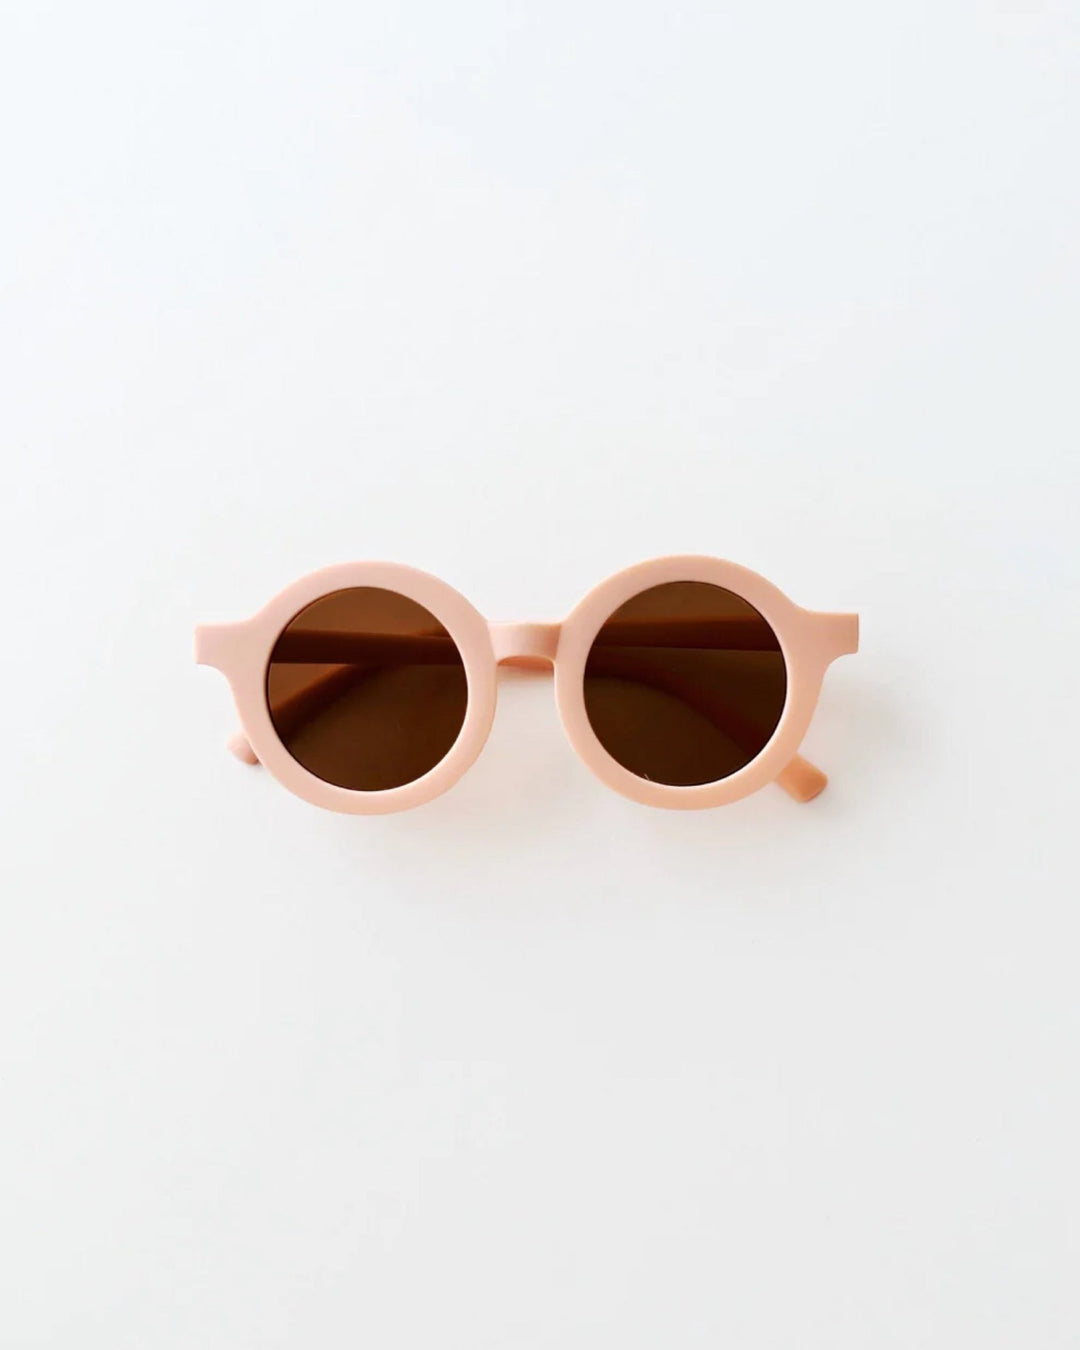 Round Sunglasses, Light Pink - Baby & Toddler Clothing Accessories - LUCKY PANDA KIDS